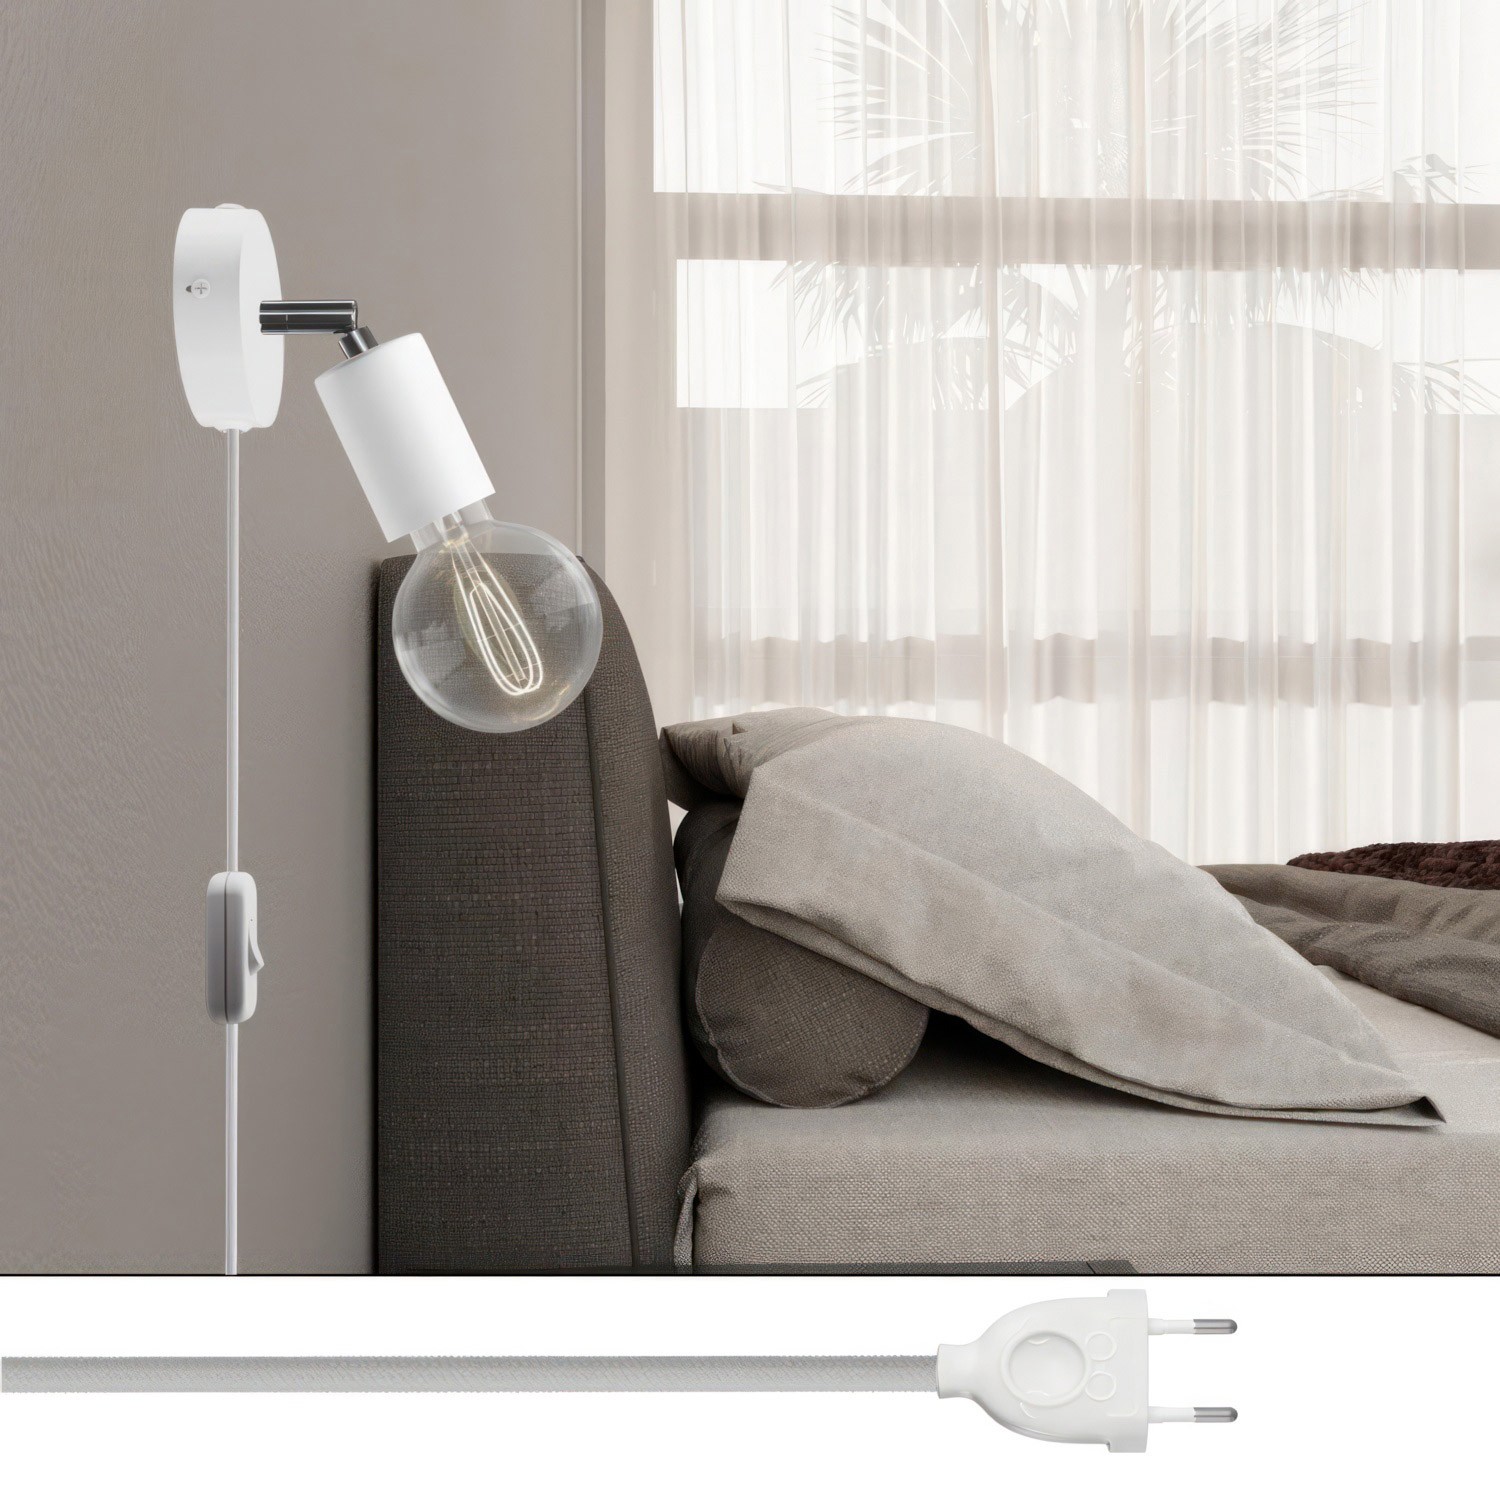 Spostaluce Lamp adjustable metal Joint with two-pin plug